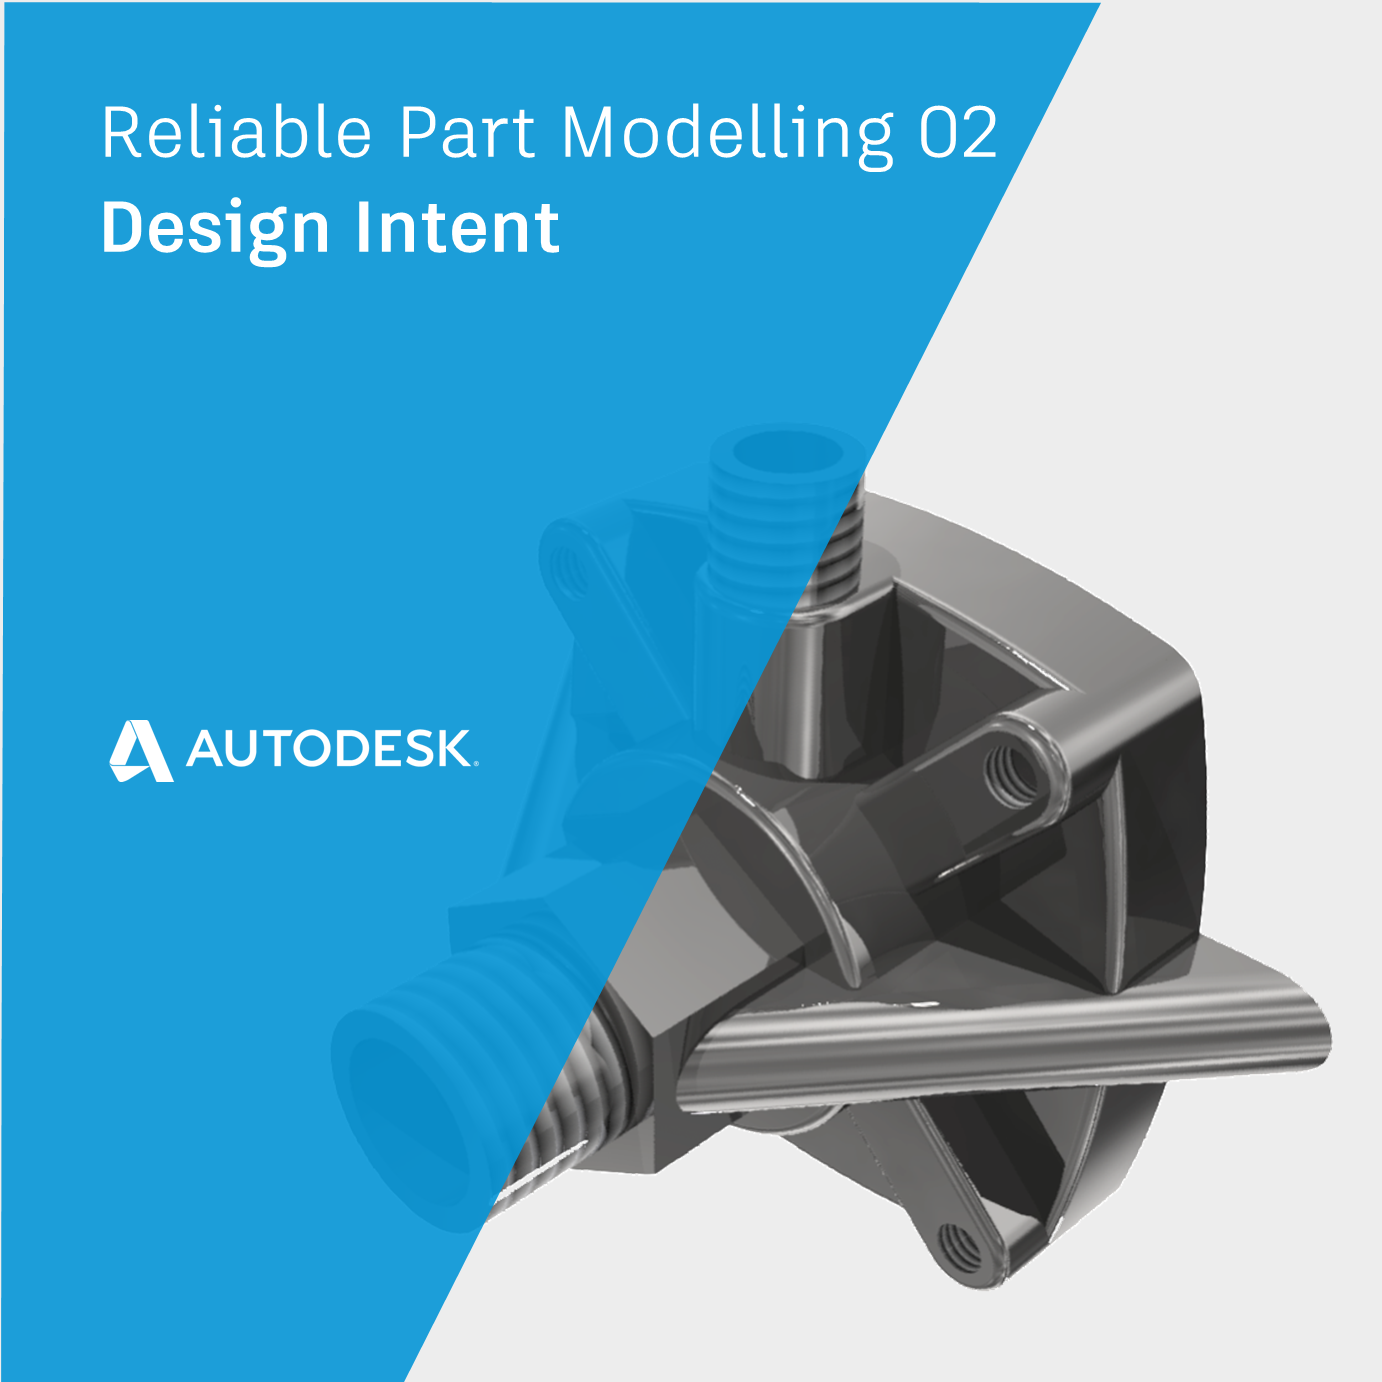 Design Intent | Reliable Part Modelling with Autodesk Inventor 02